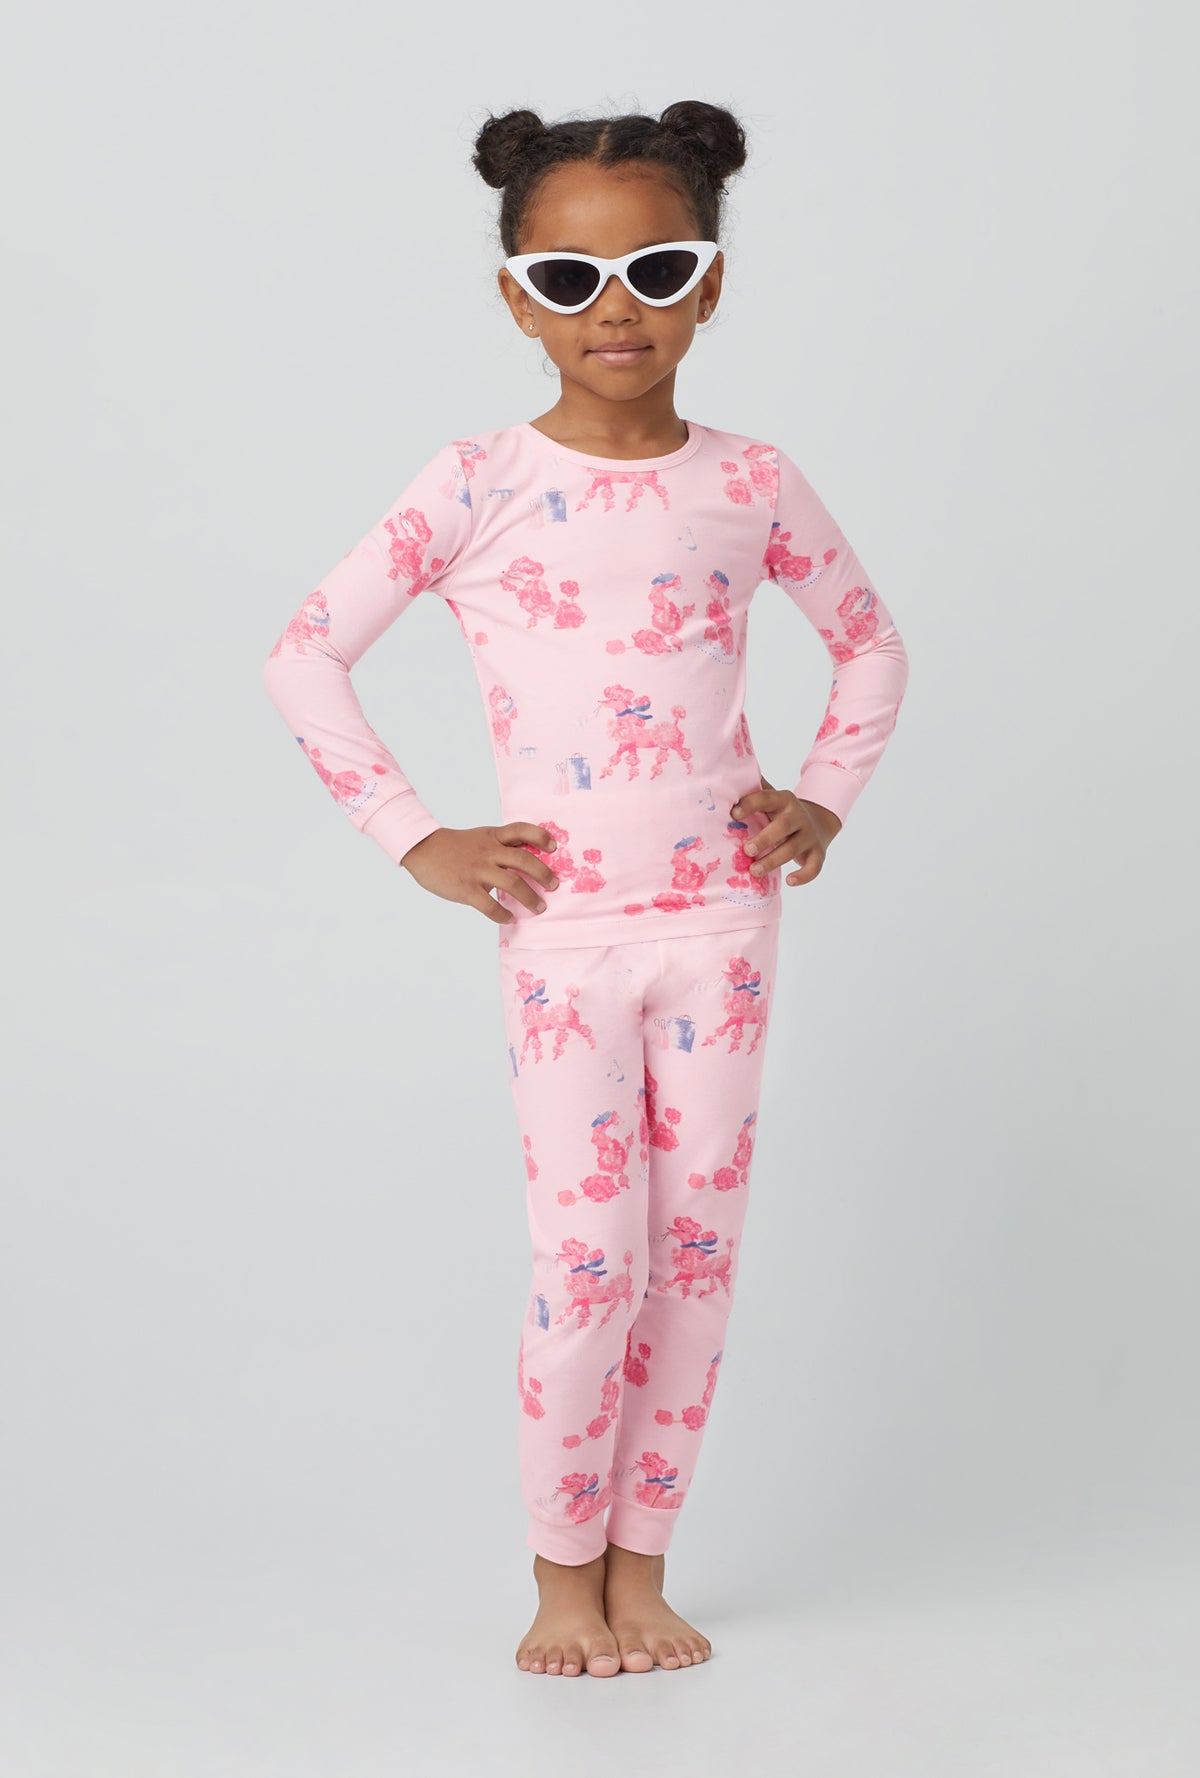 A girl wearing  Long Sleeve Stretch Jersey Kids PJ Set with pampered Poodles print